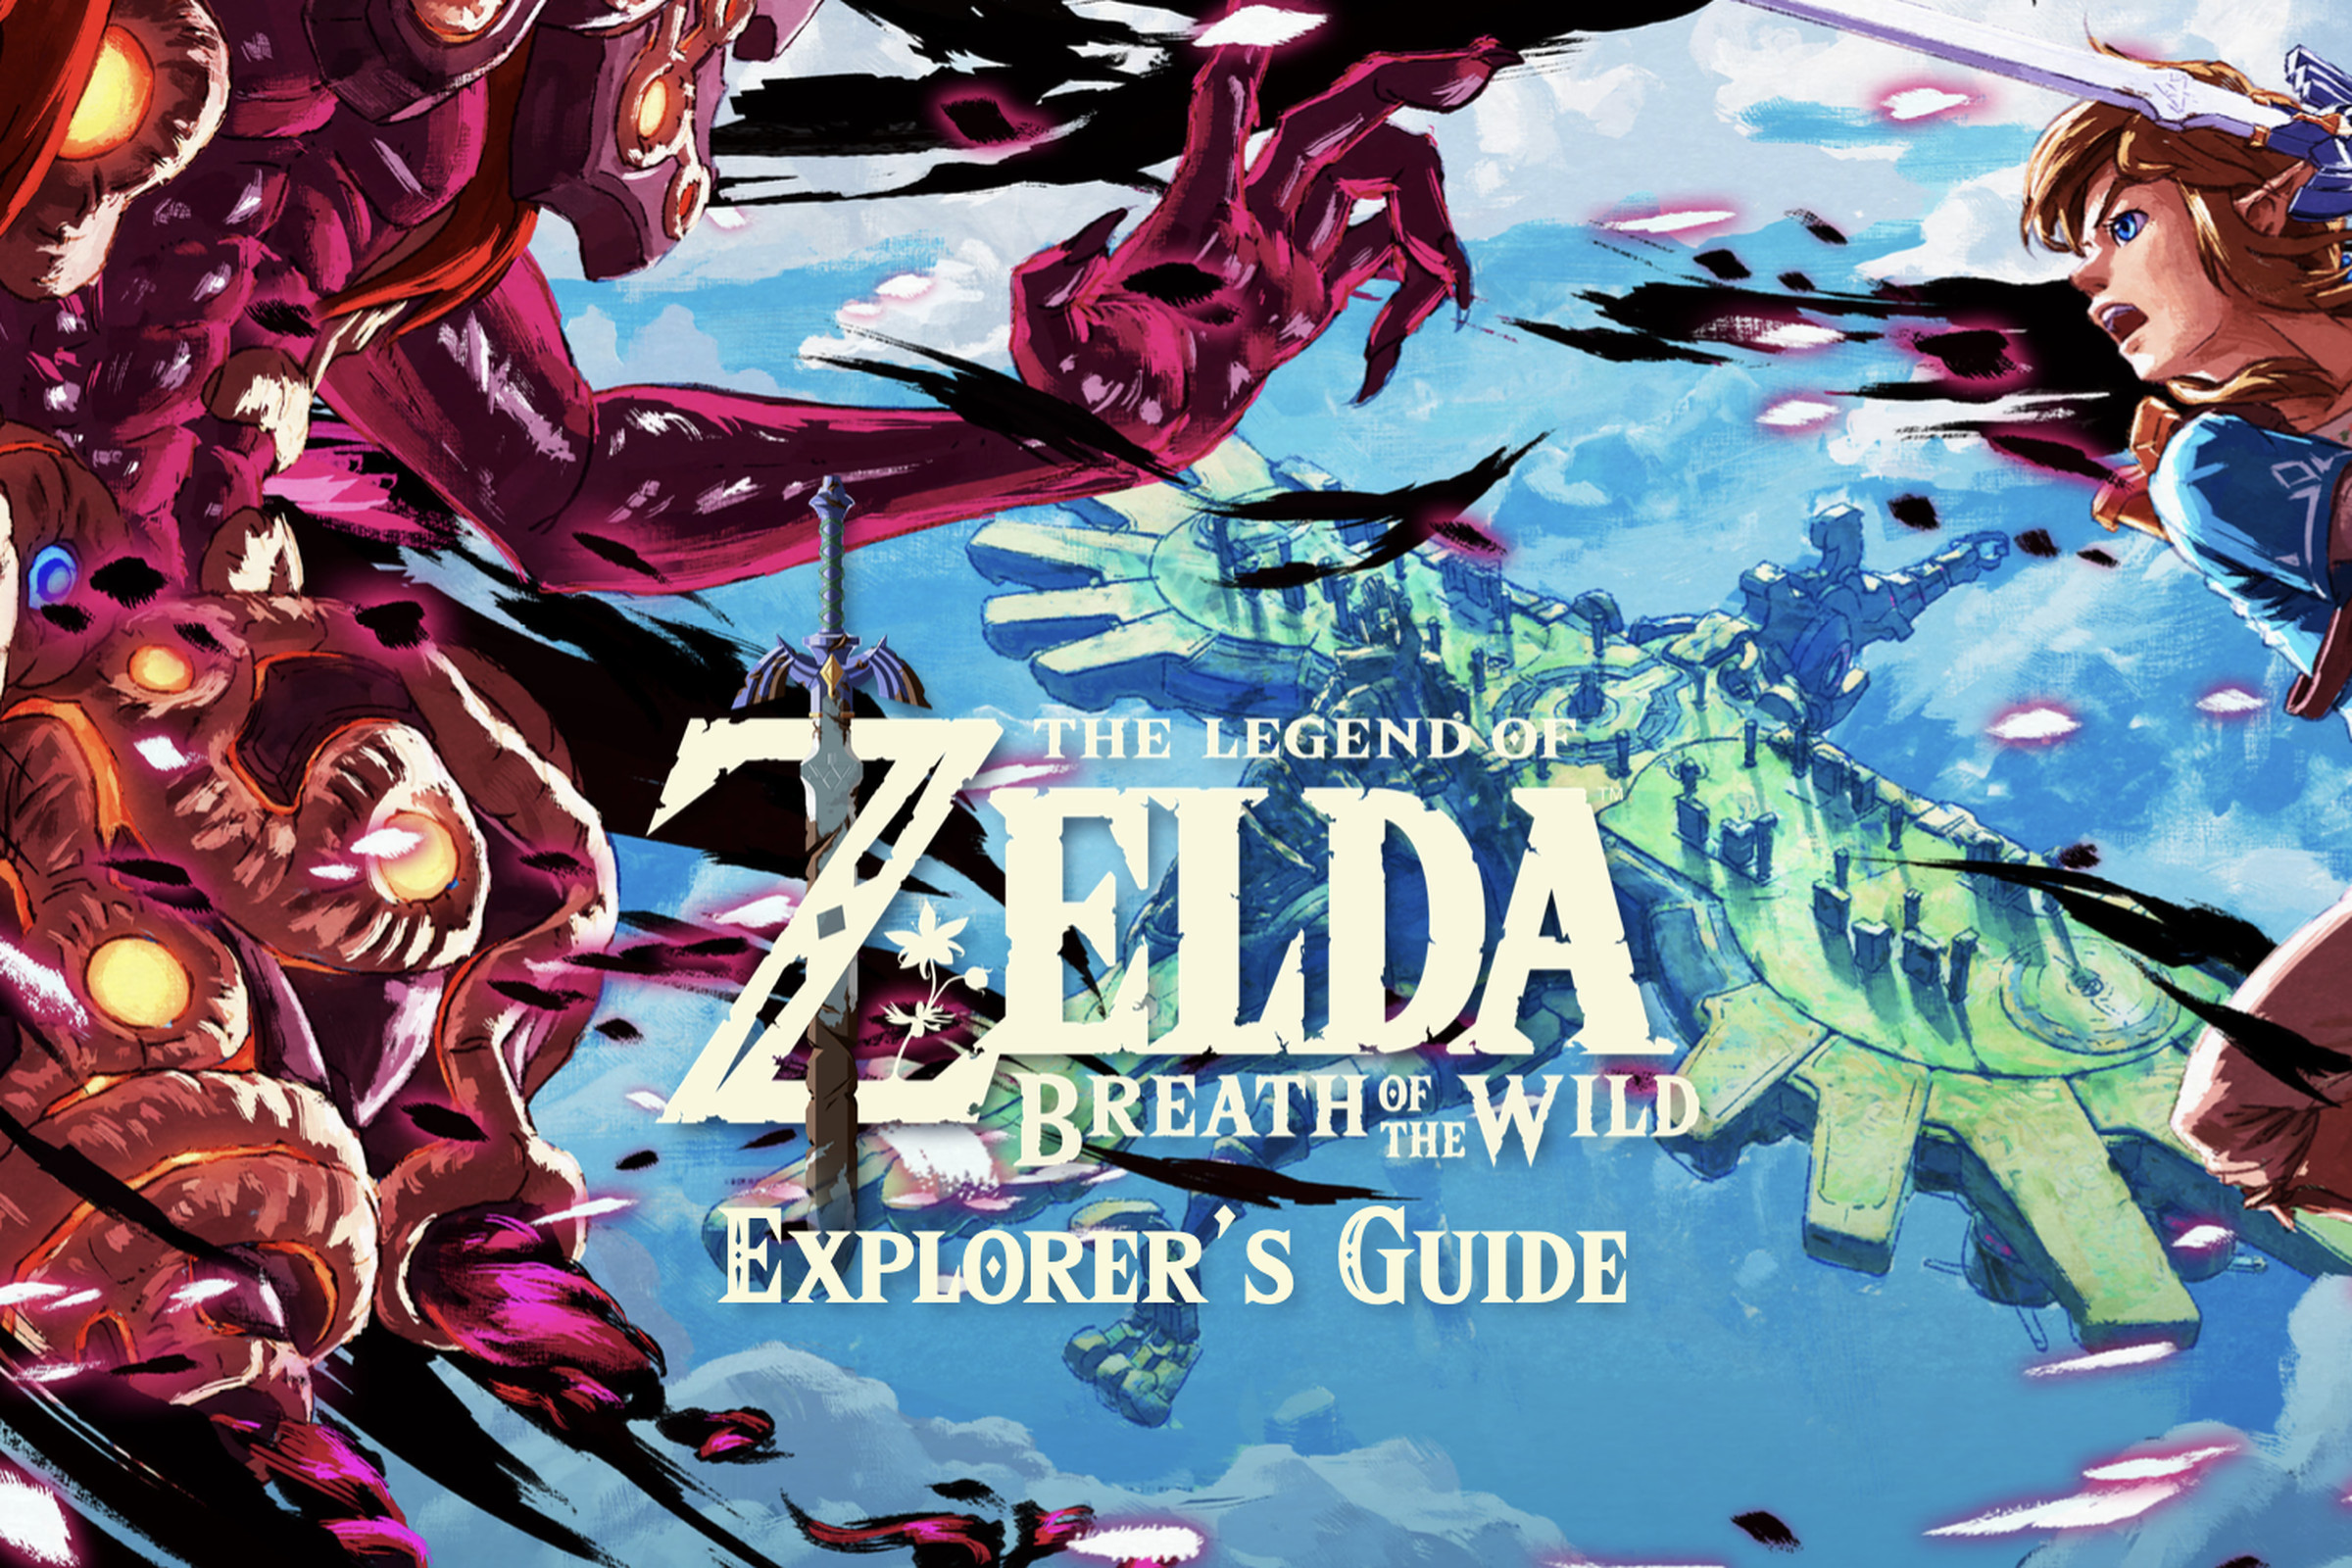 Cover of the Legend of Zelda: Breath of the Wild Explorer’s Guide